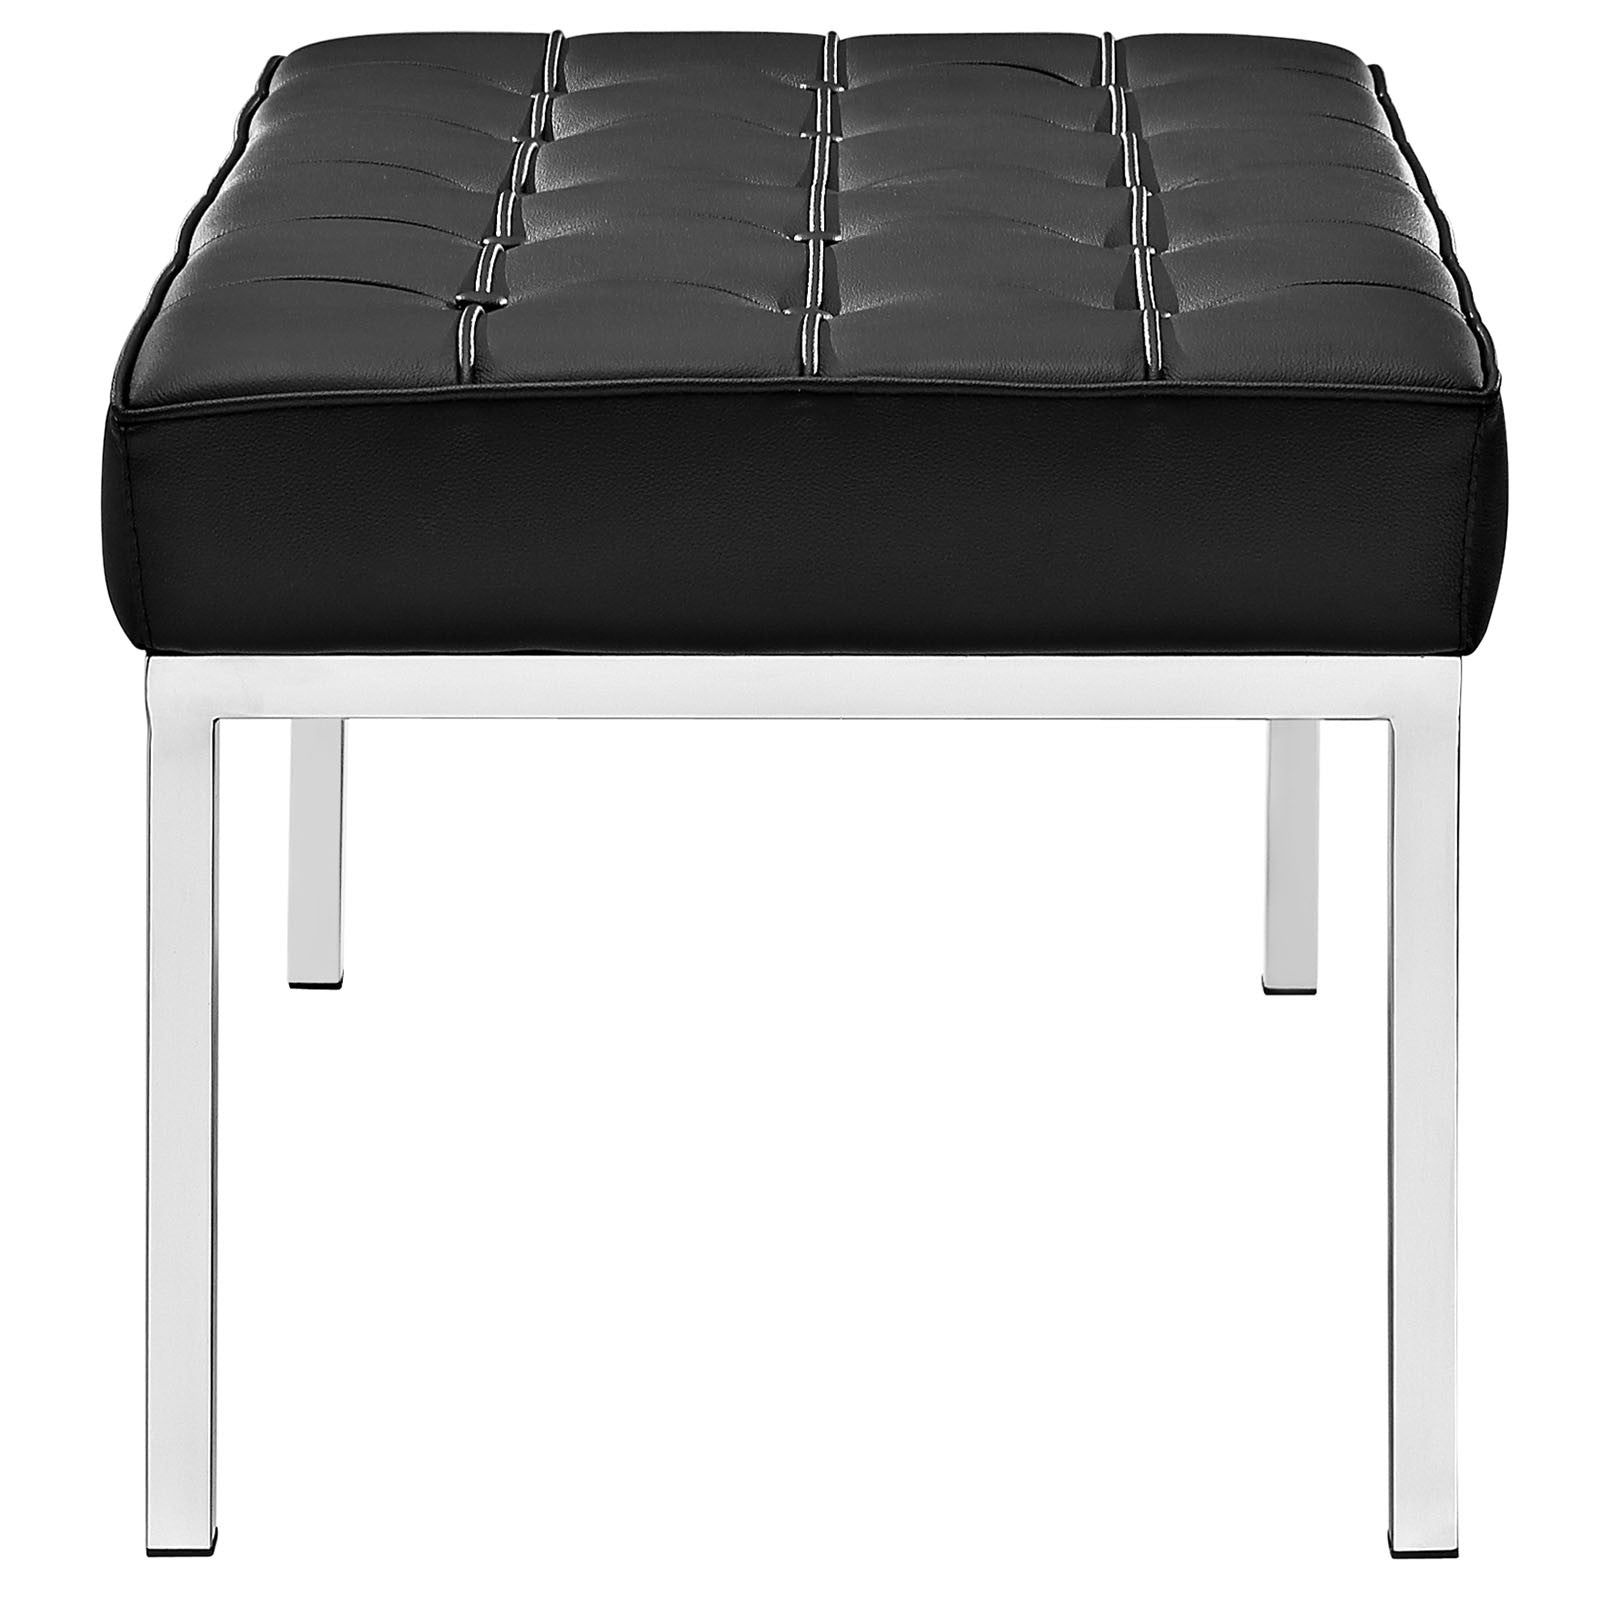 Lyte Two-Seater Bench Black